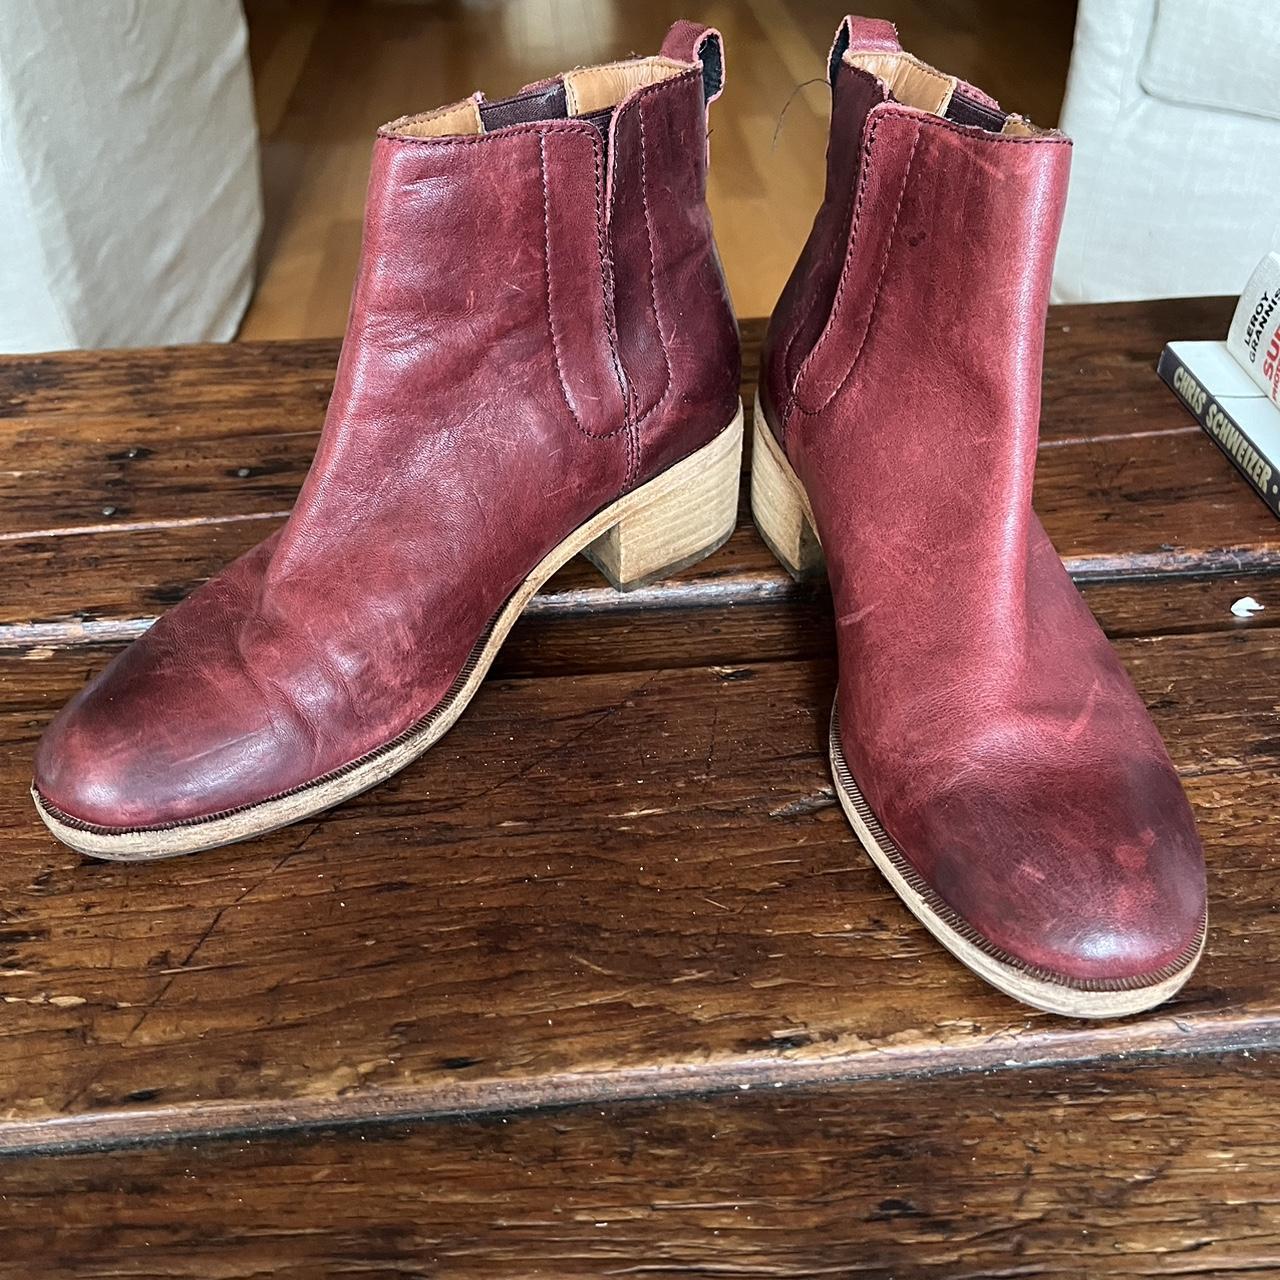 Korks Women's Burgundy and Brown Boots (5)